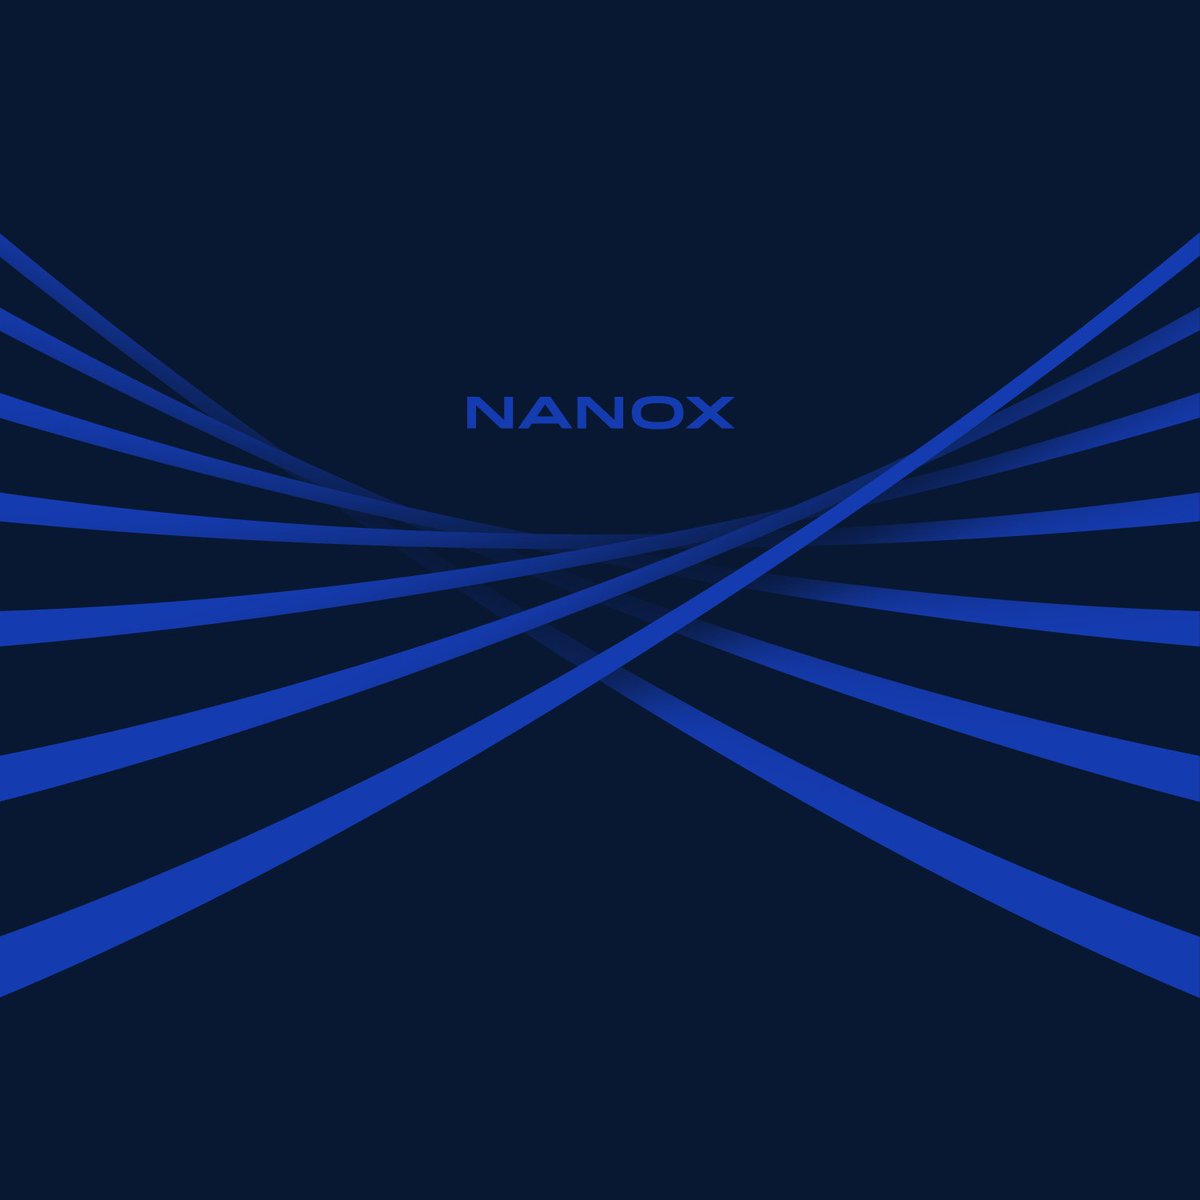 Please join me today at a live presentation where I will provide a business update on Nanox Vision, joined by other senior Nanox executives.
#medicalimaging #preventivehealthcare #XRAY globenewswire.com/news-release/2…